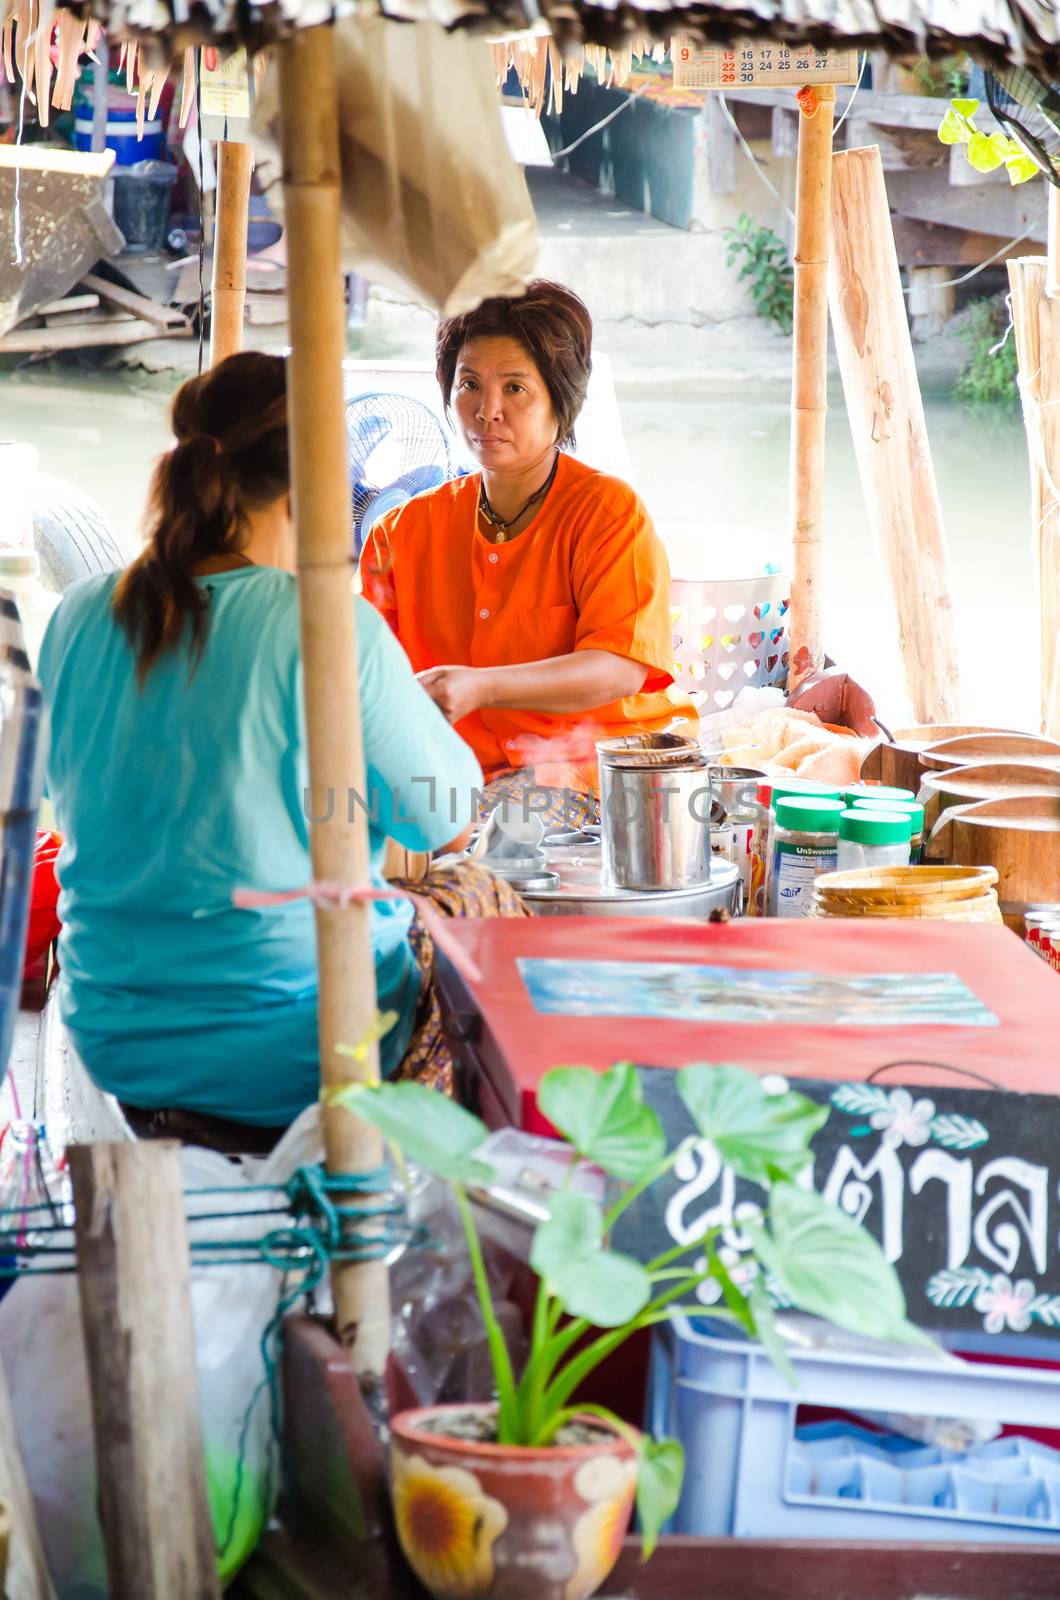 AYUTTHAYA - SEPTEMBER 22:  Tourists and people sell food items at Ayothaya Floating Market on September 22, 2013 in Ayutthaya, Thailand. Ayothaya Floating Market  is a very popular tourist attraction.